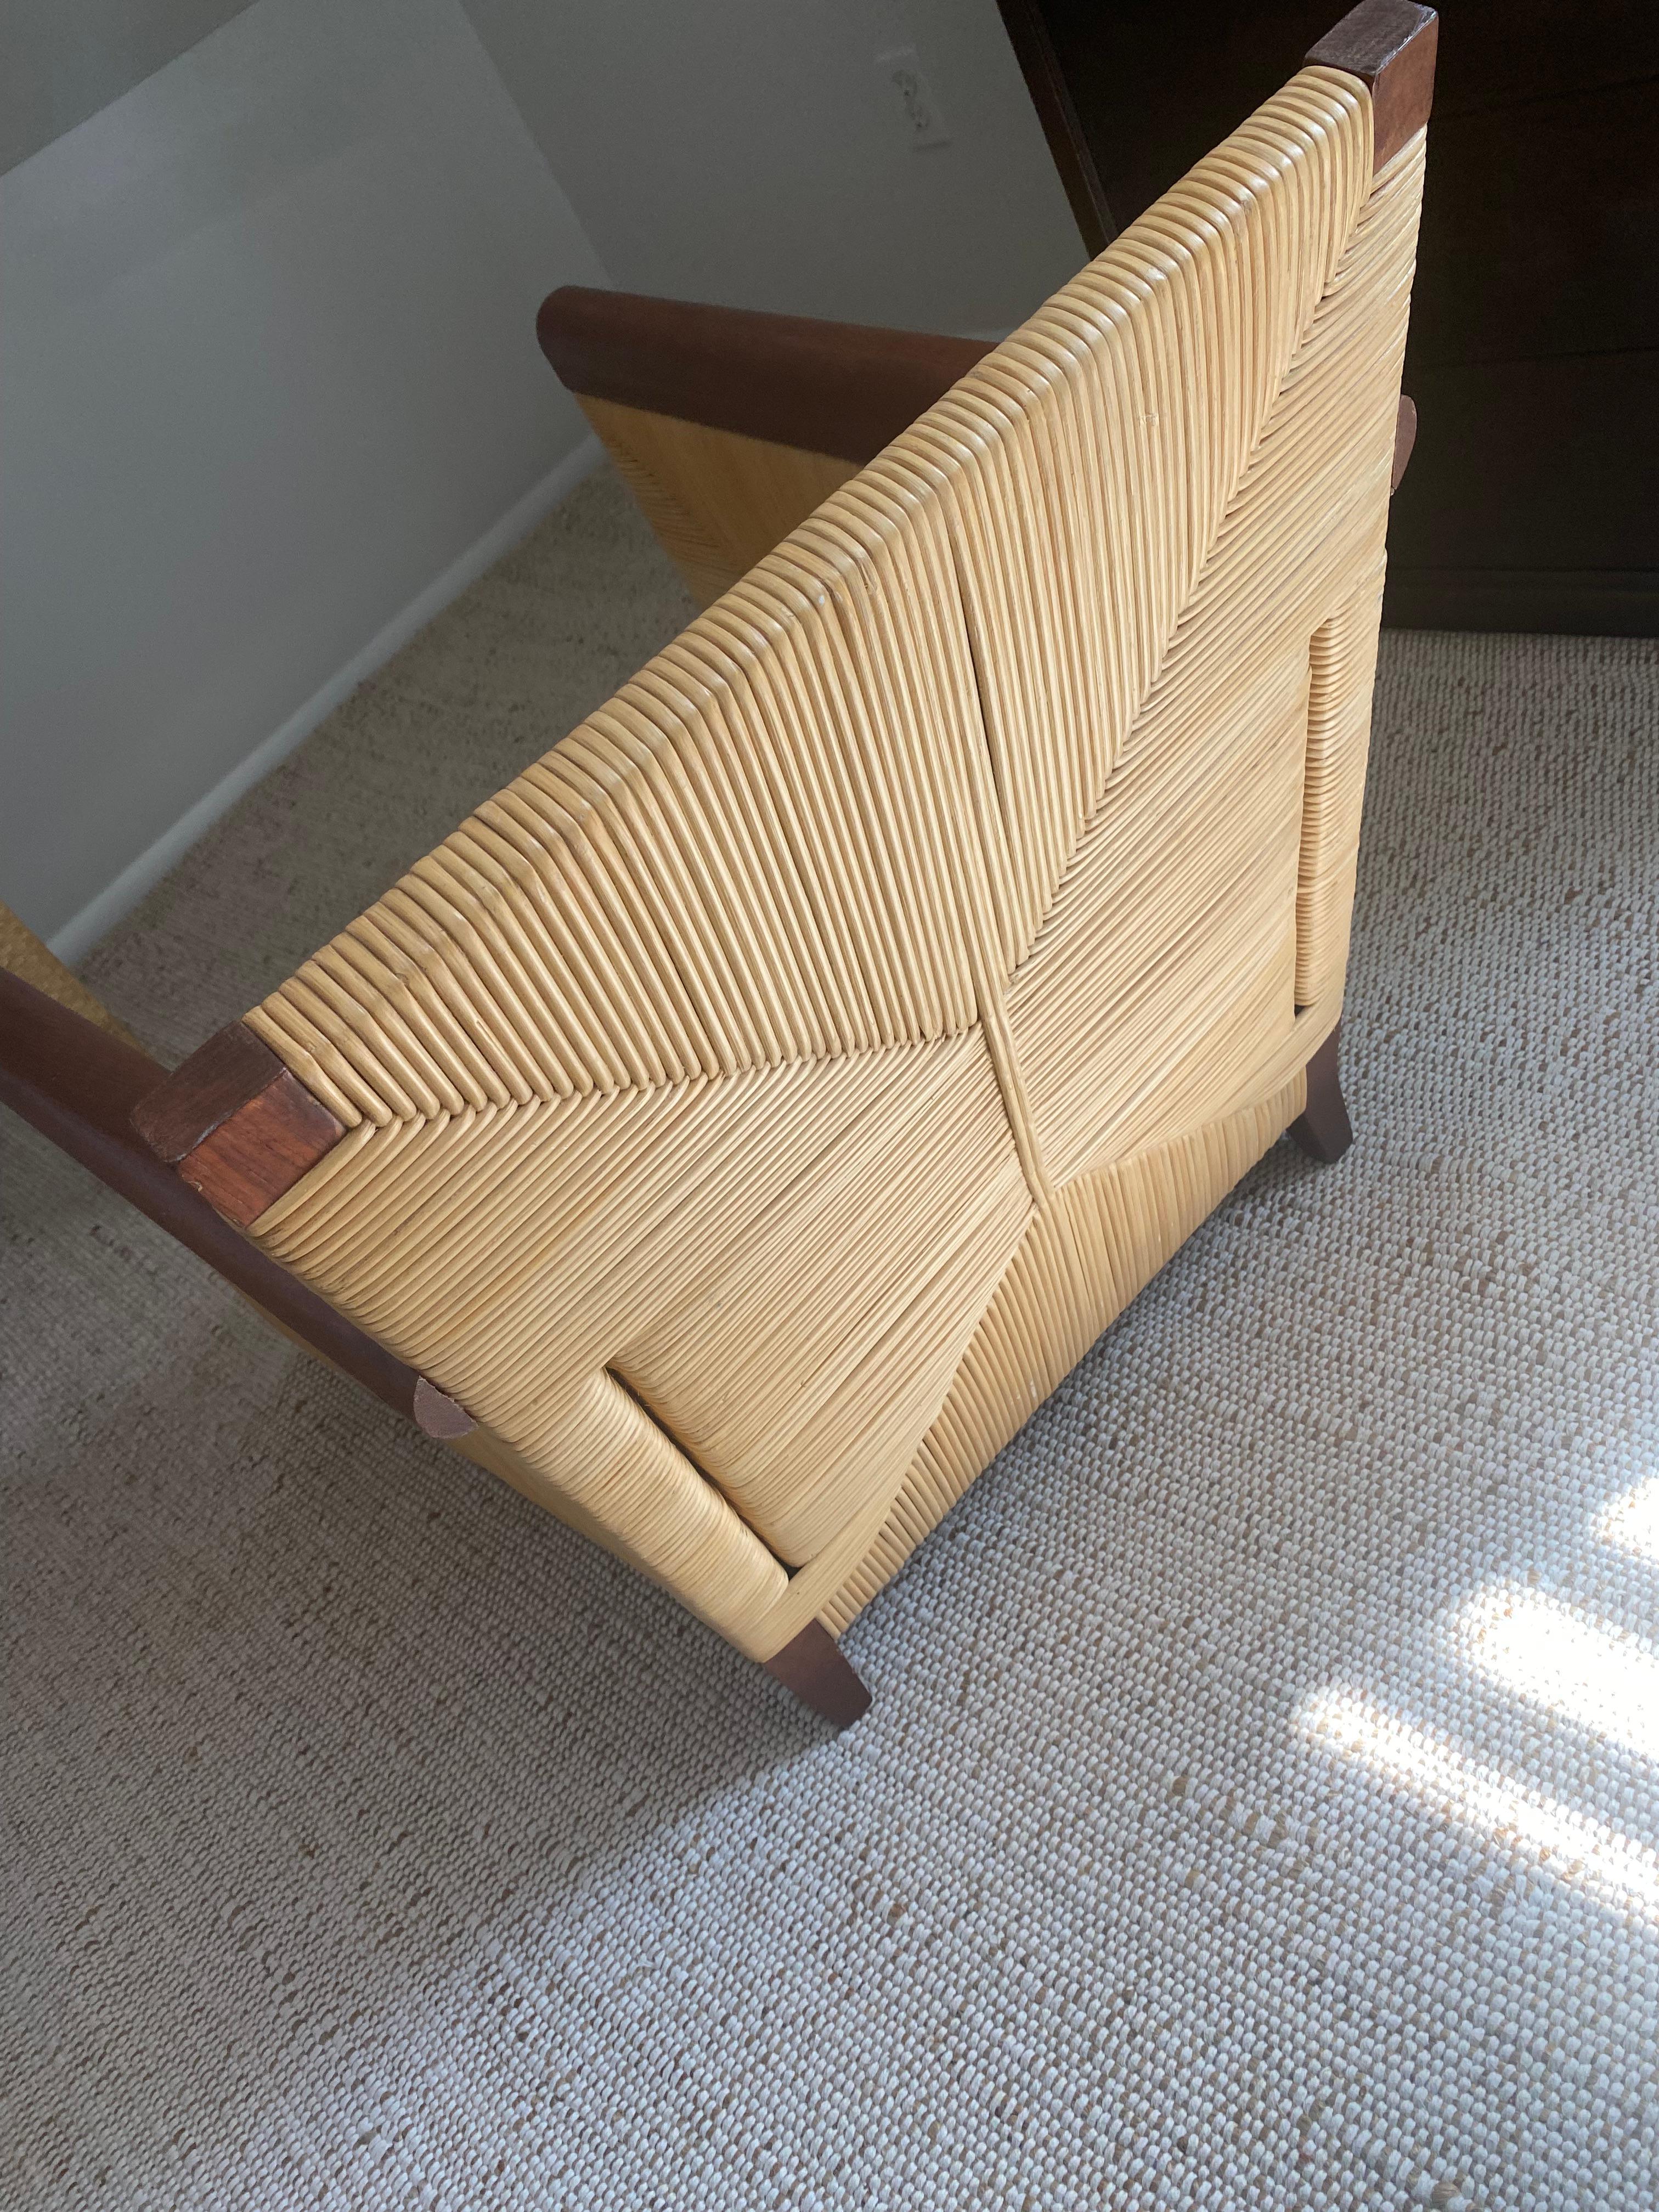 Rush cane armchair designed John Hutton for Donghia 1980s mahogany accents In Good Condition For Sale In Bridgehampton, NY